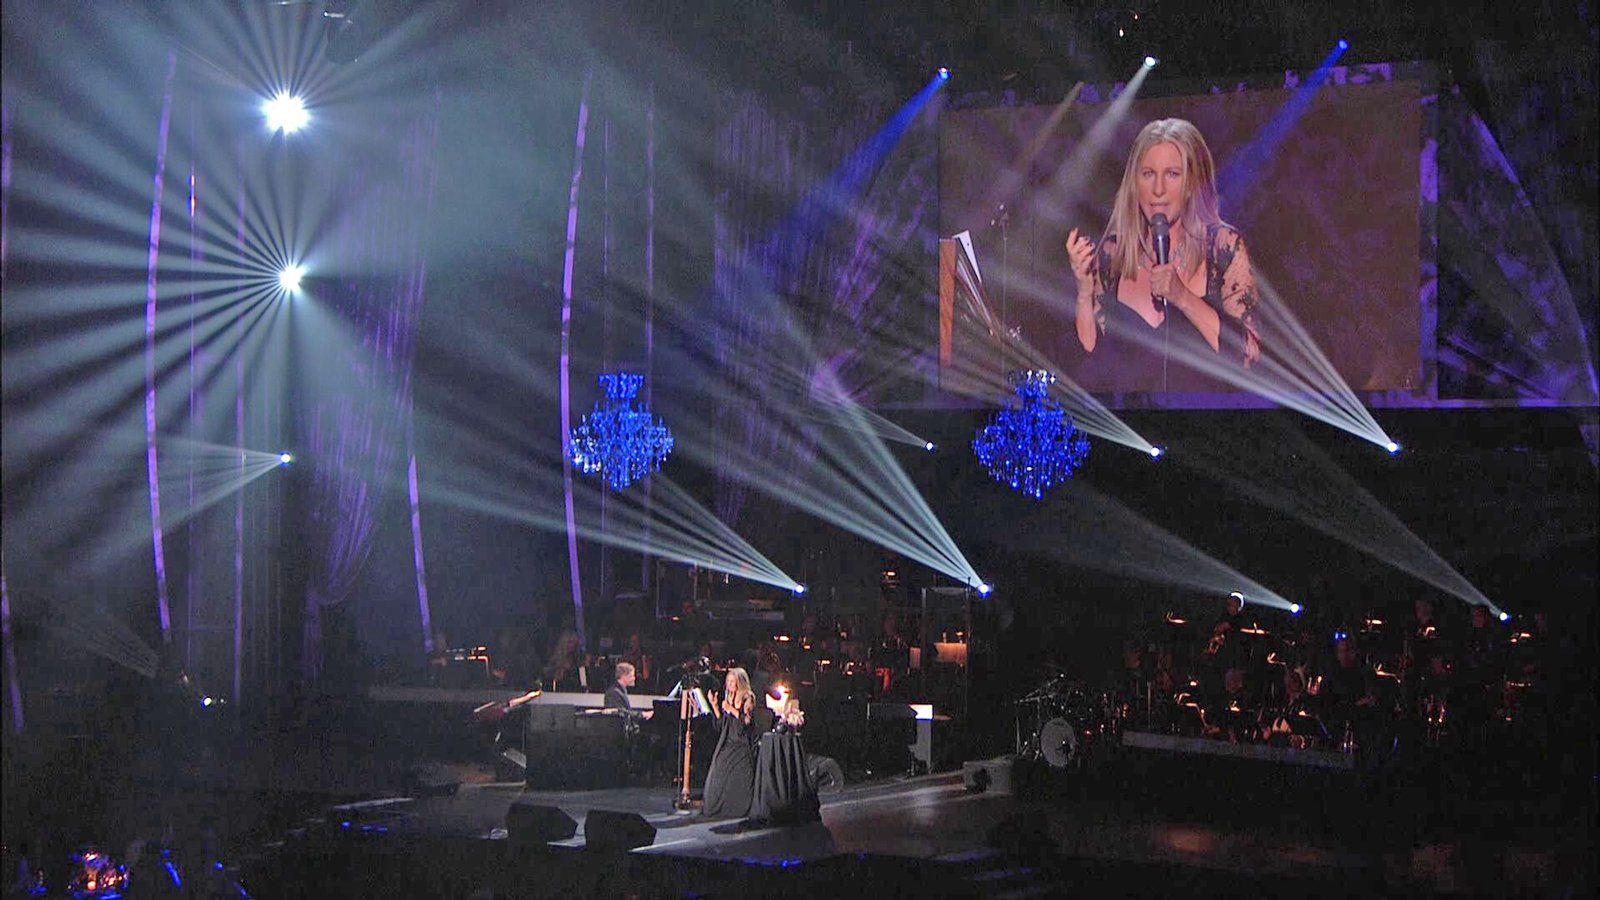 Streisand sings on stage at the 2011 MusiCares concert.